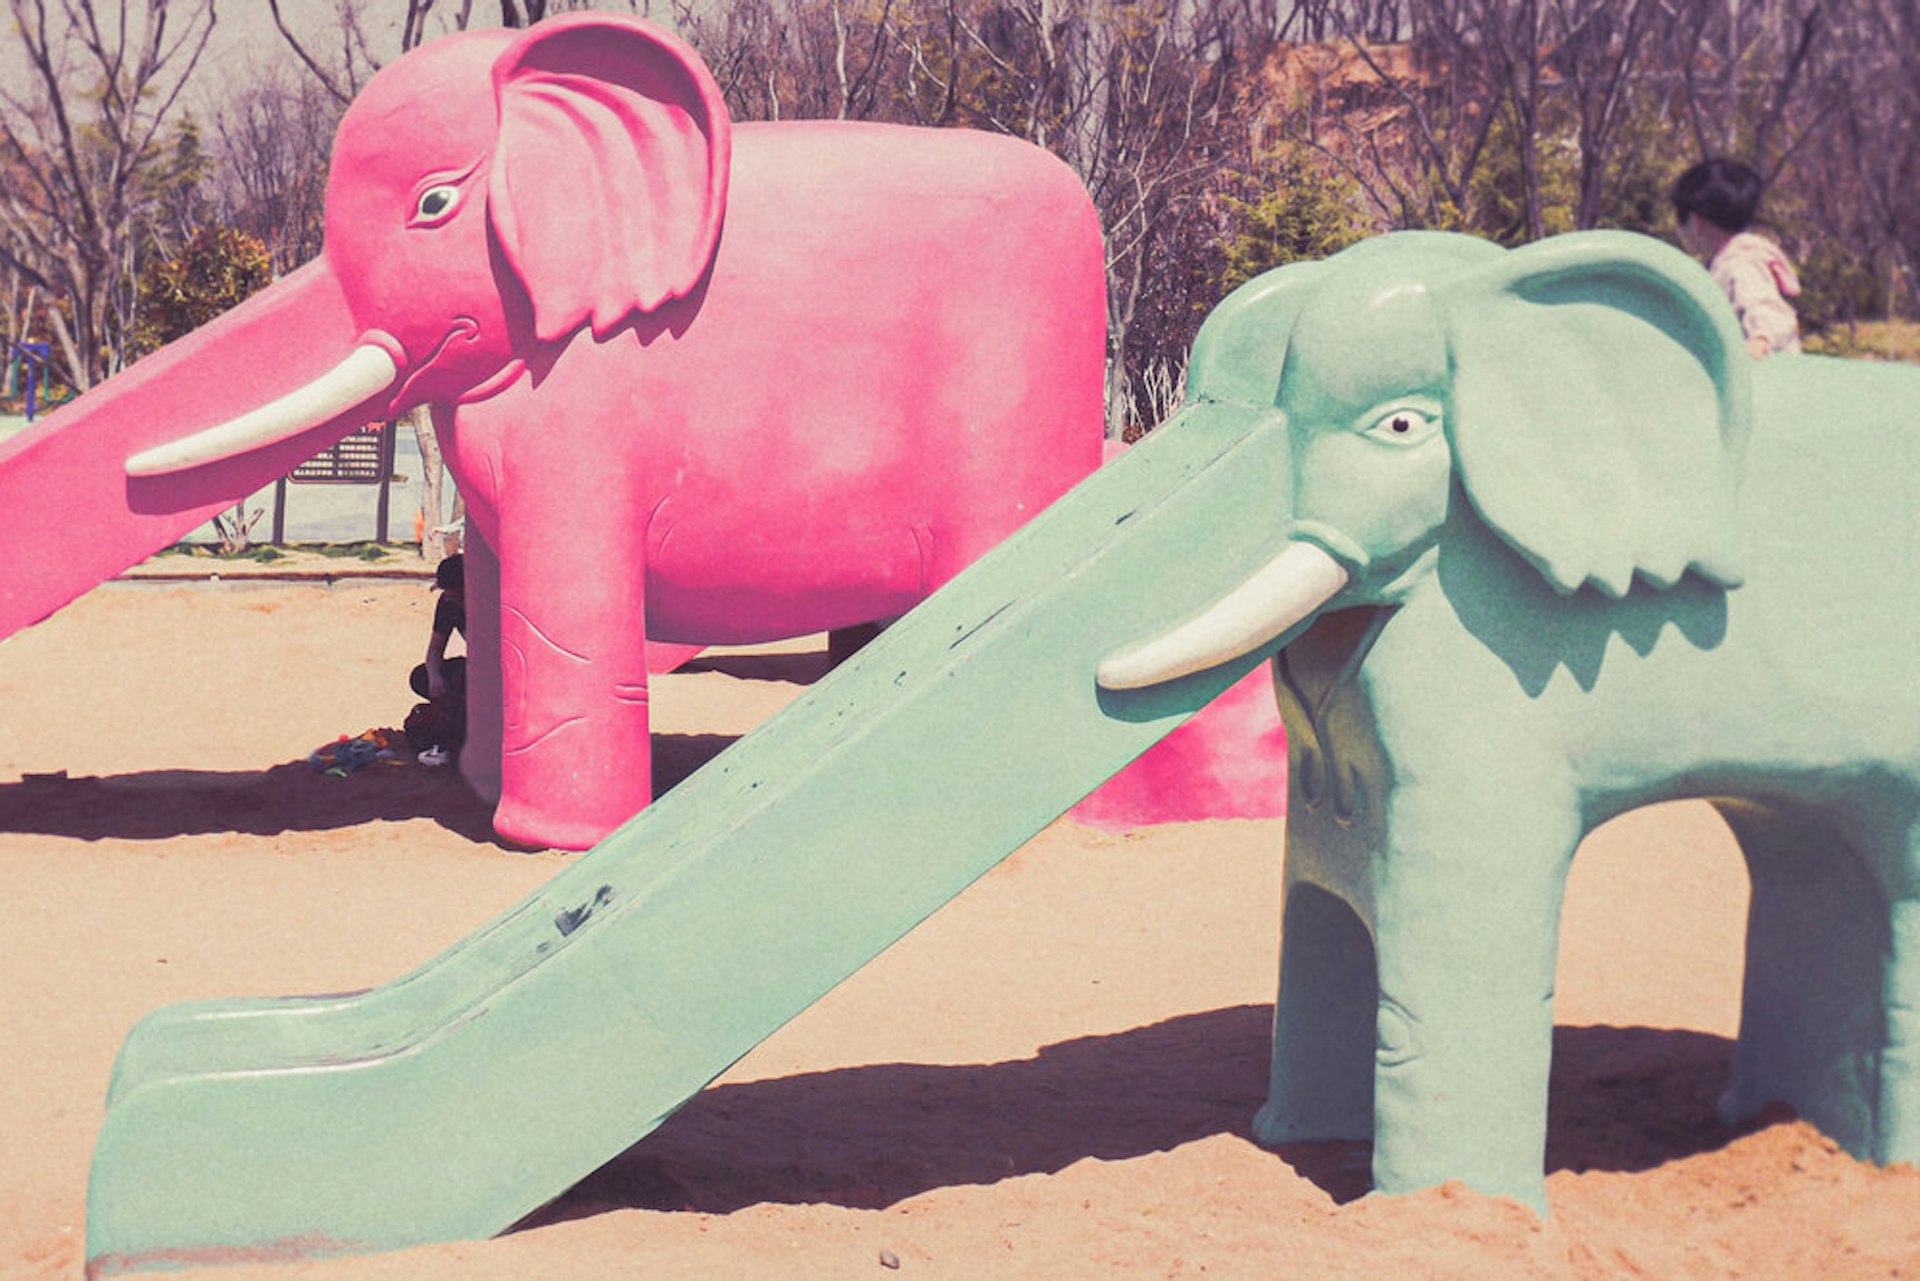 Playground equipment shaped like elephants with slides for trunks. 